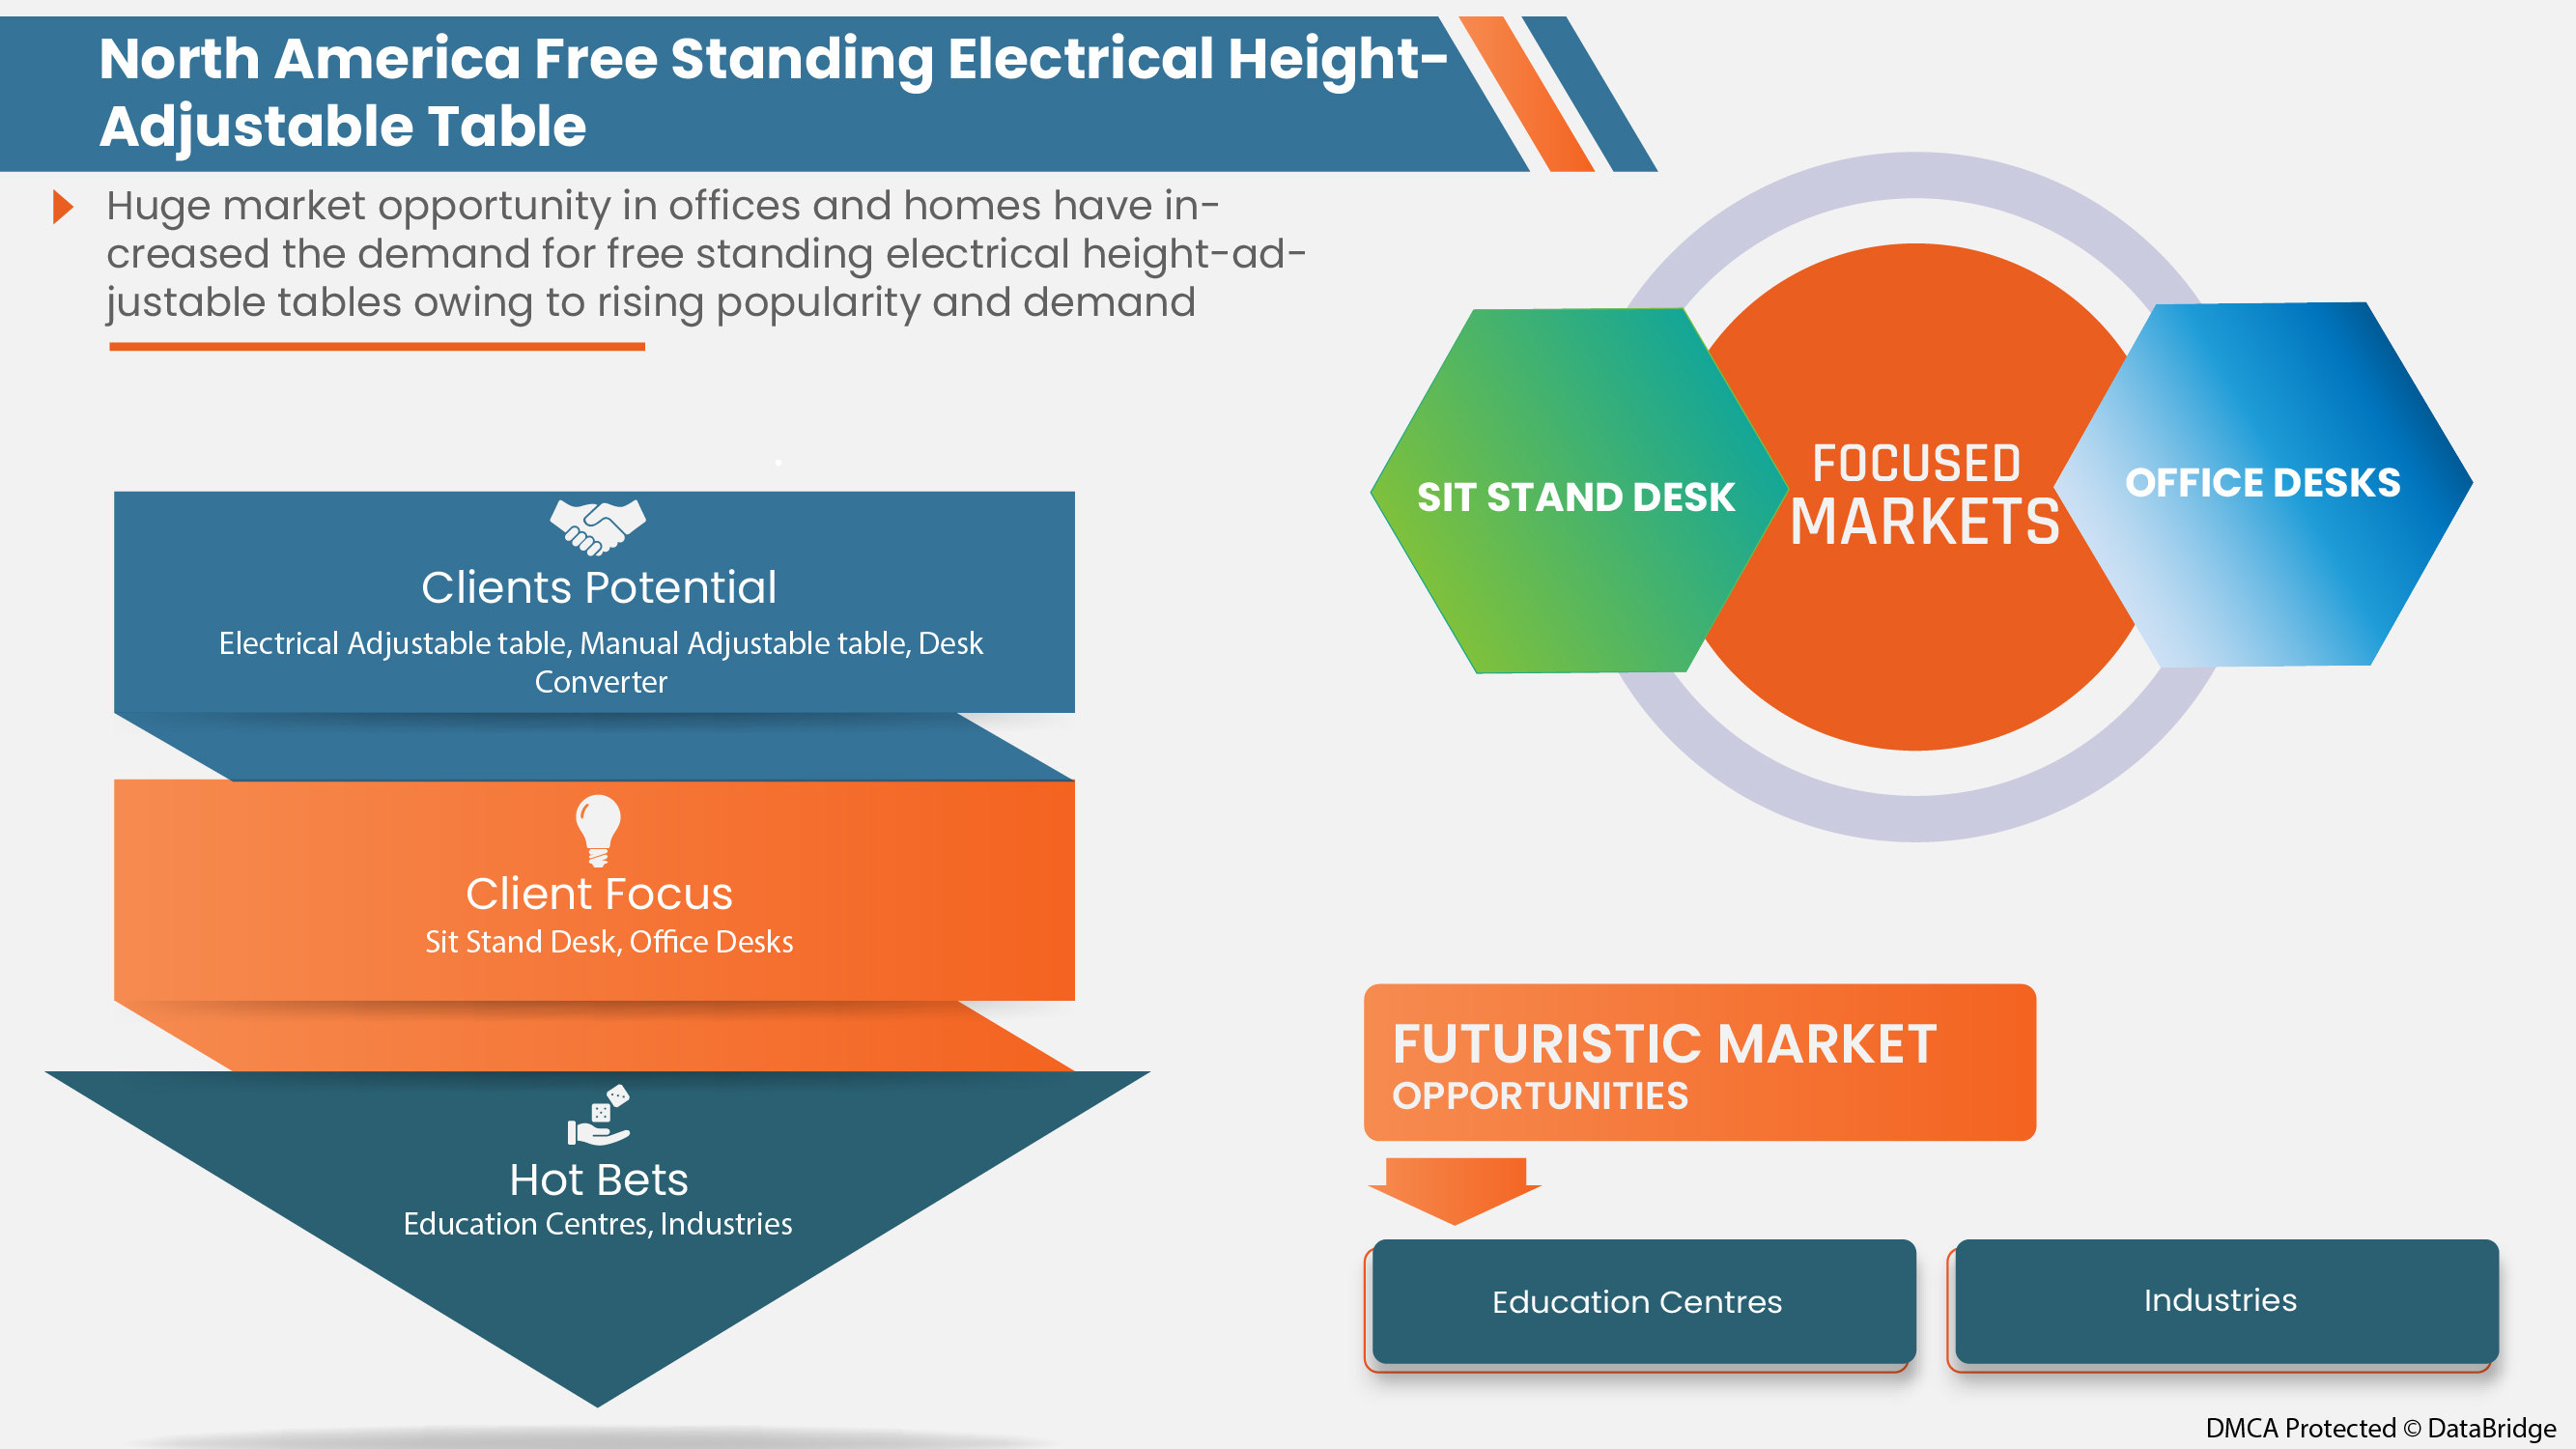 North America Free Standing Electrical Height-Adjustable Tables Market